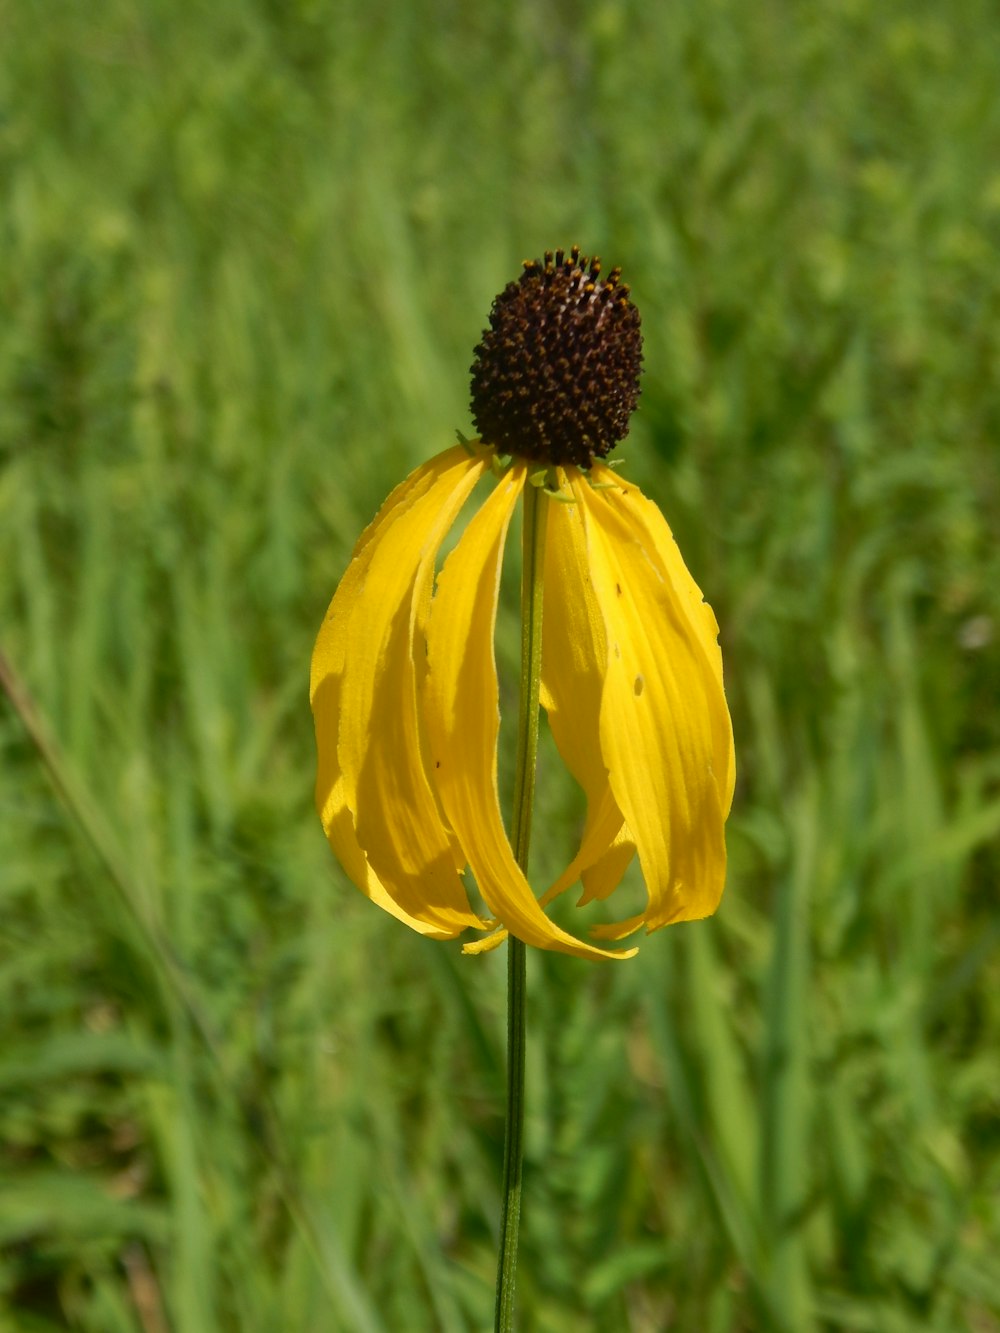 a yellow flower with a black center